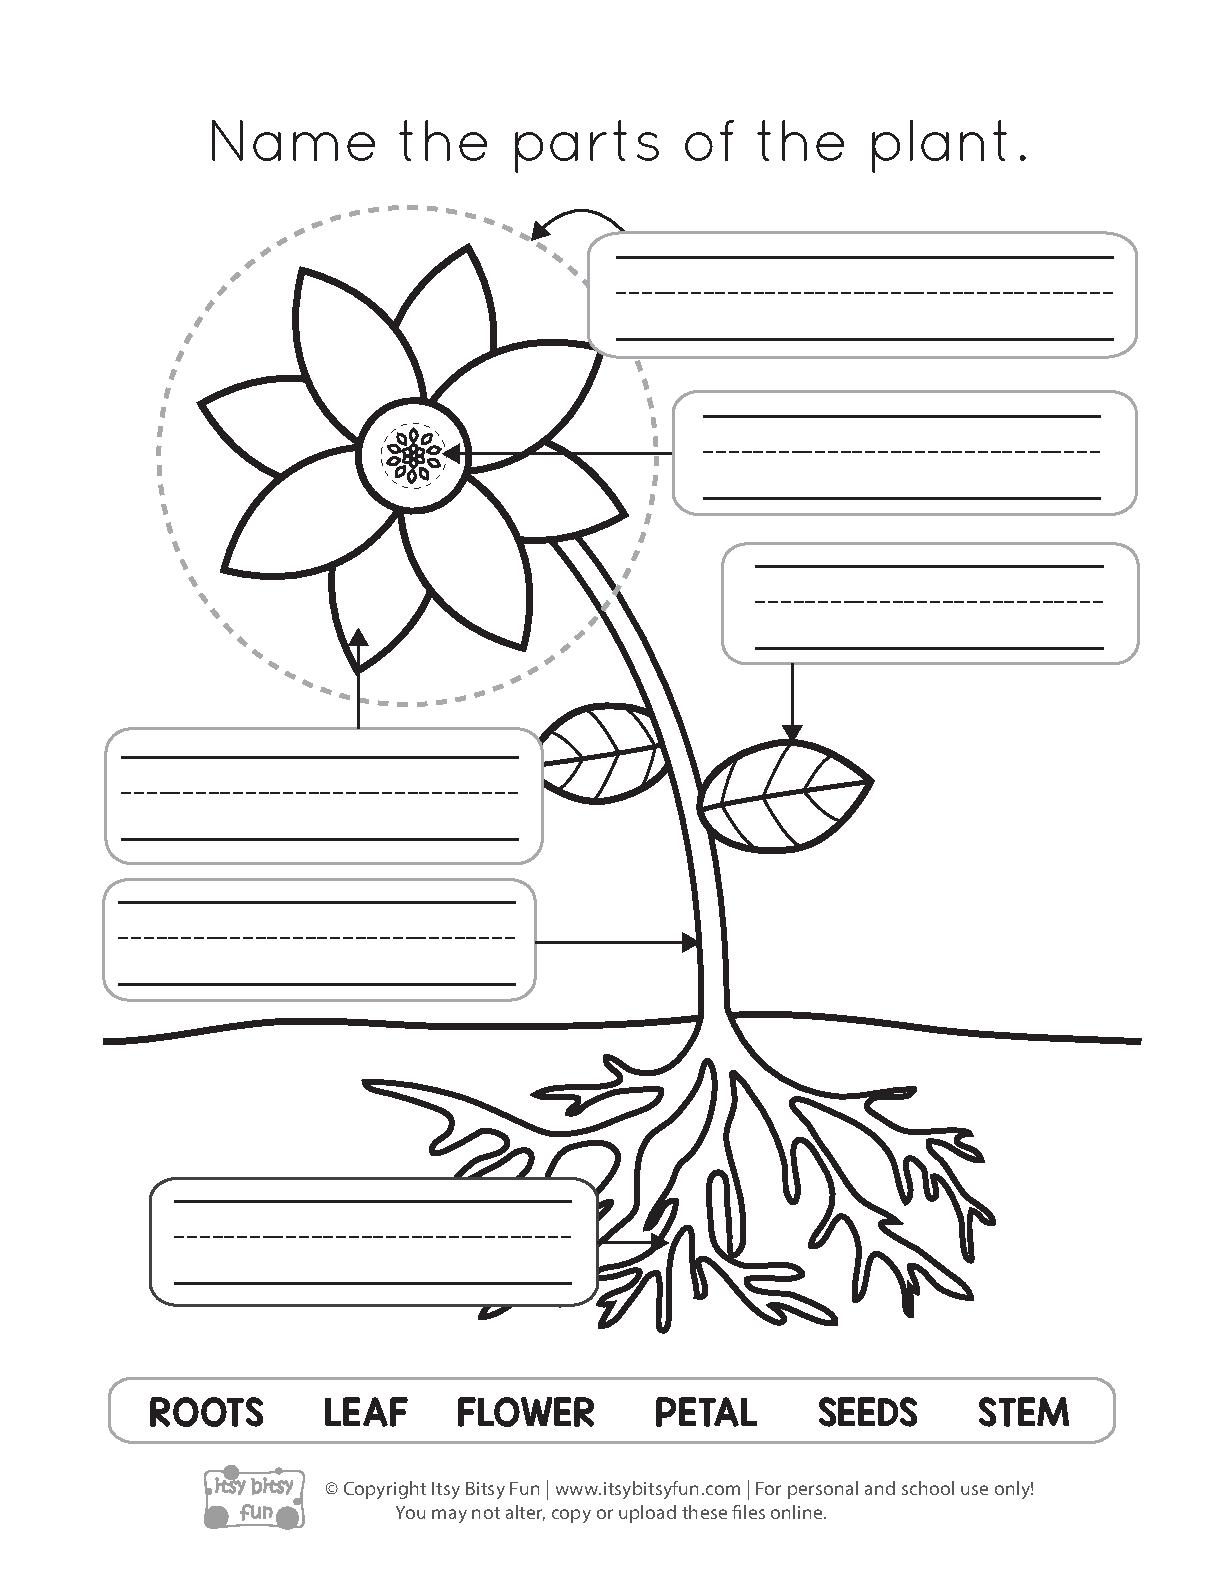 Parts of a Plant Worksheets 7 pages.pdf PDF Host